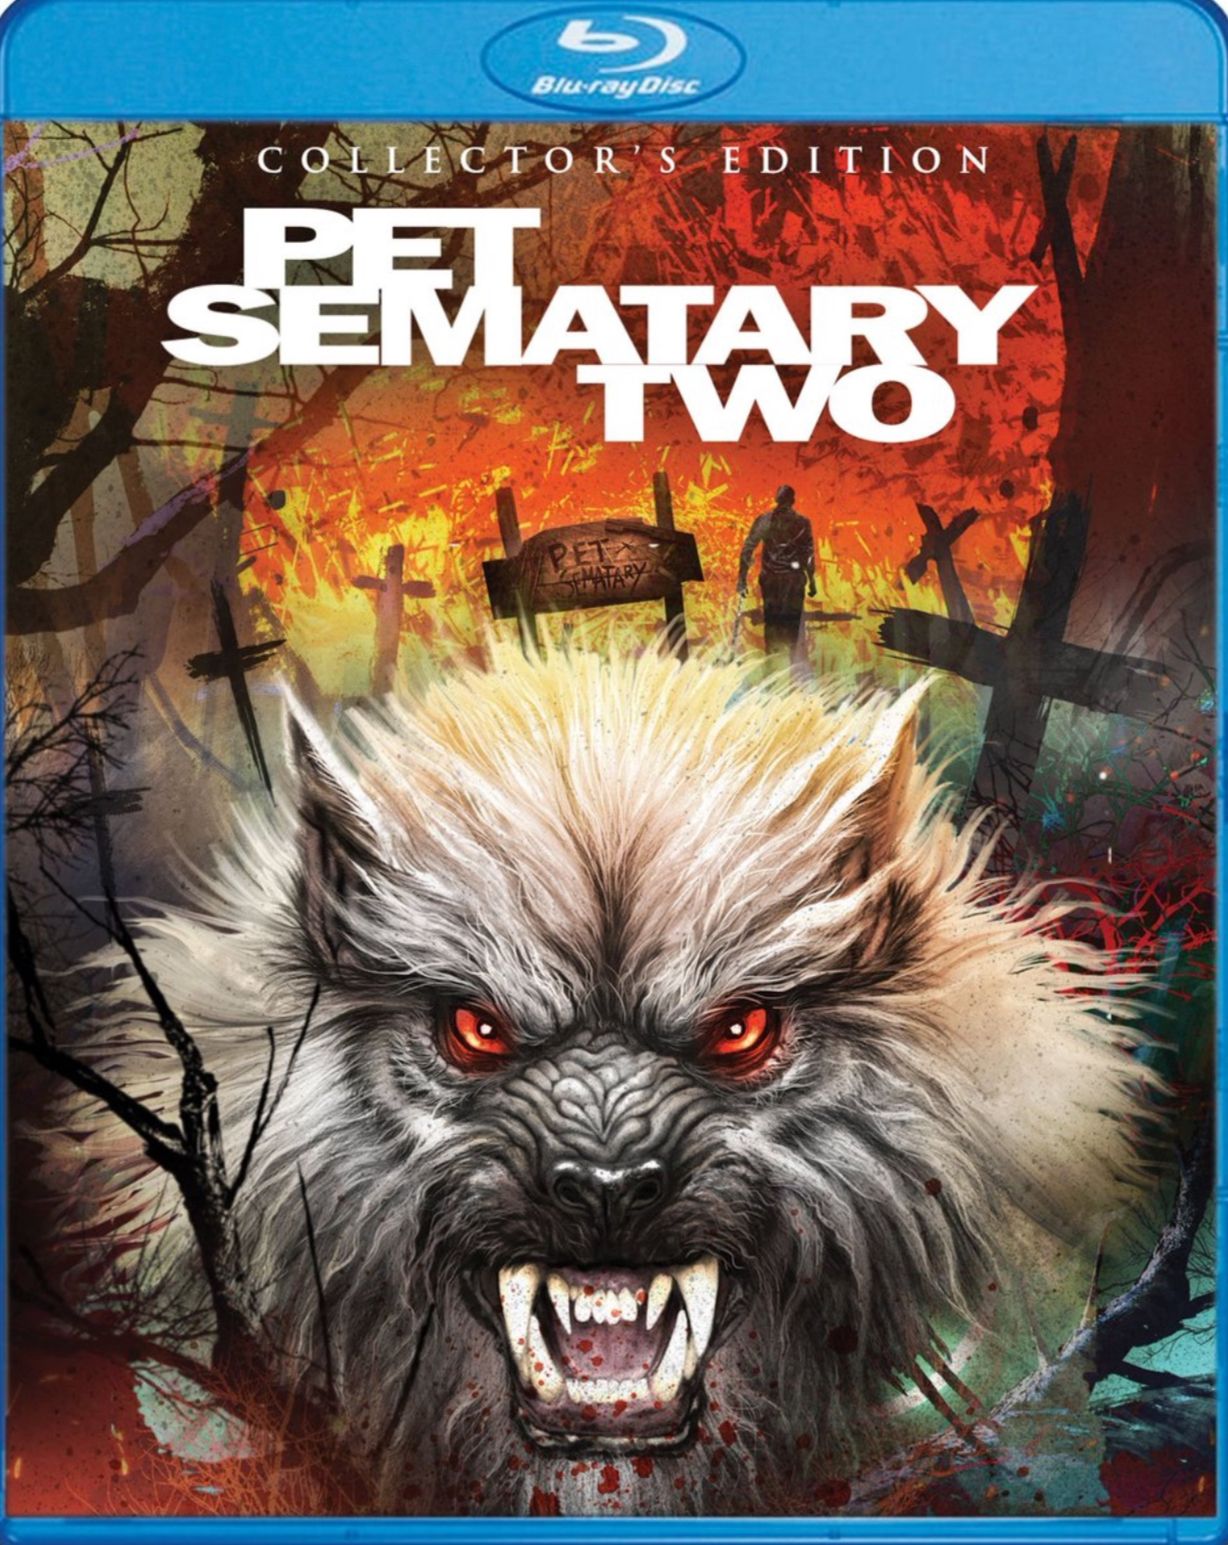 Pet Sematary Two Collector's Edition Blu-ray cover art